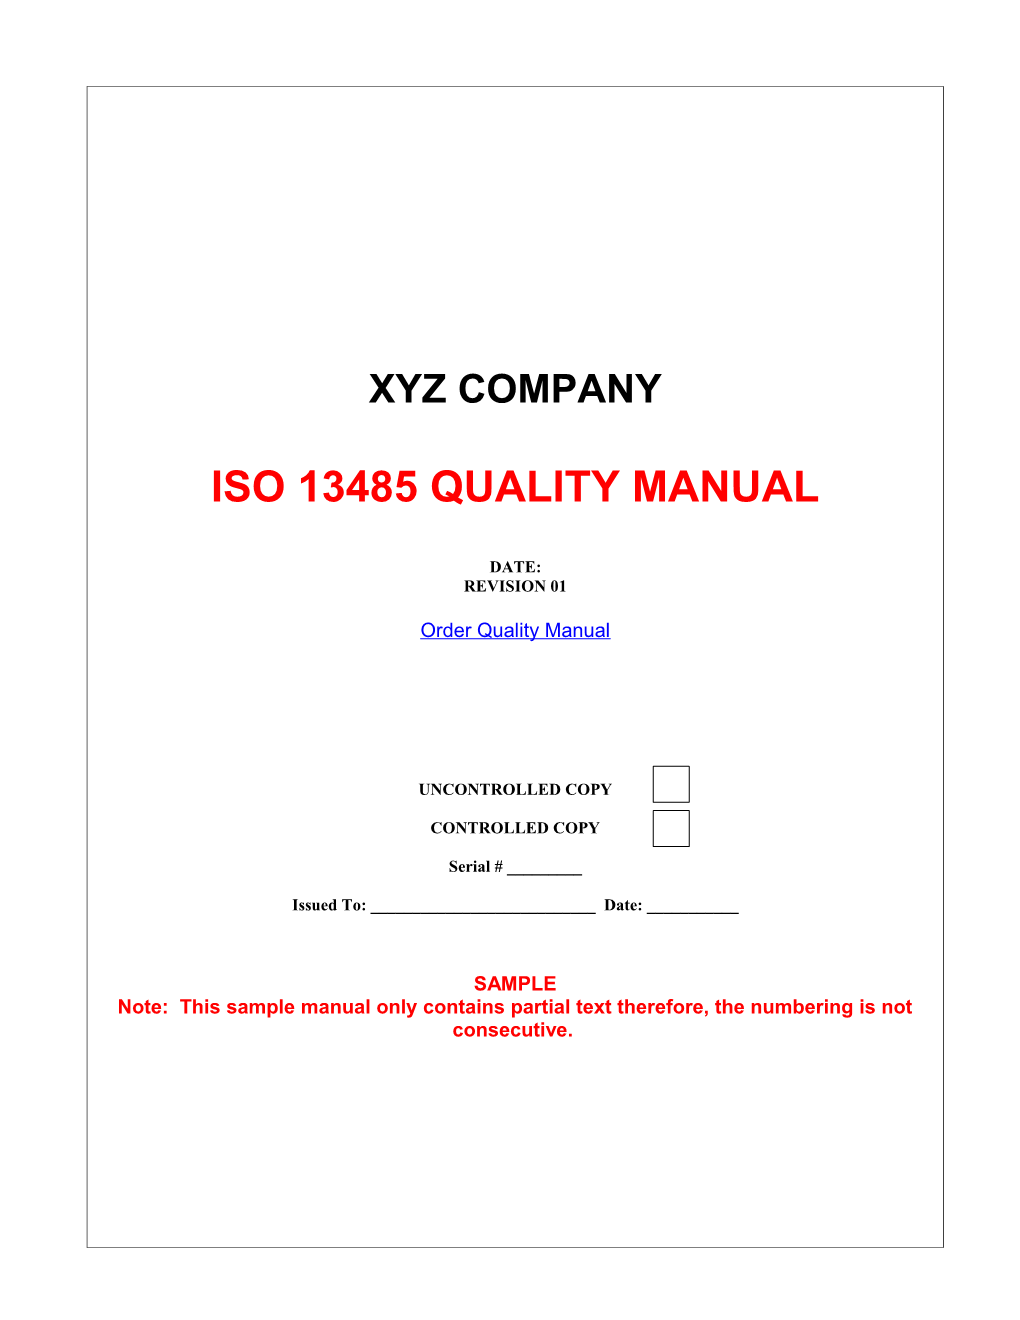 ISO 13485 Quality Manual